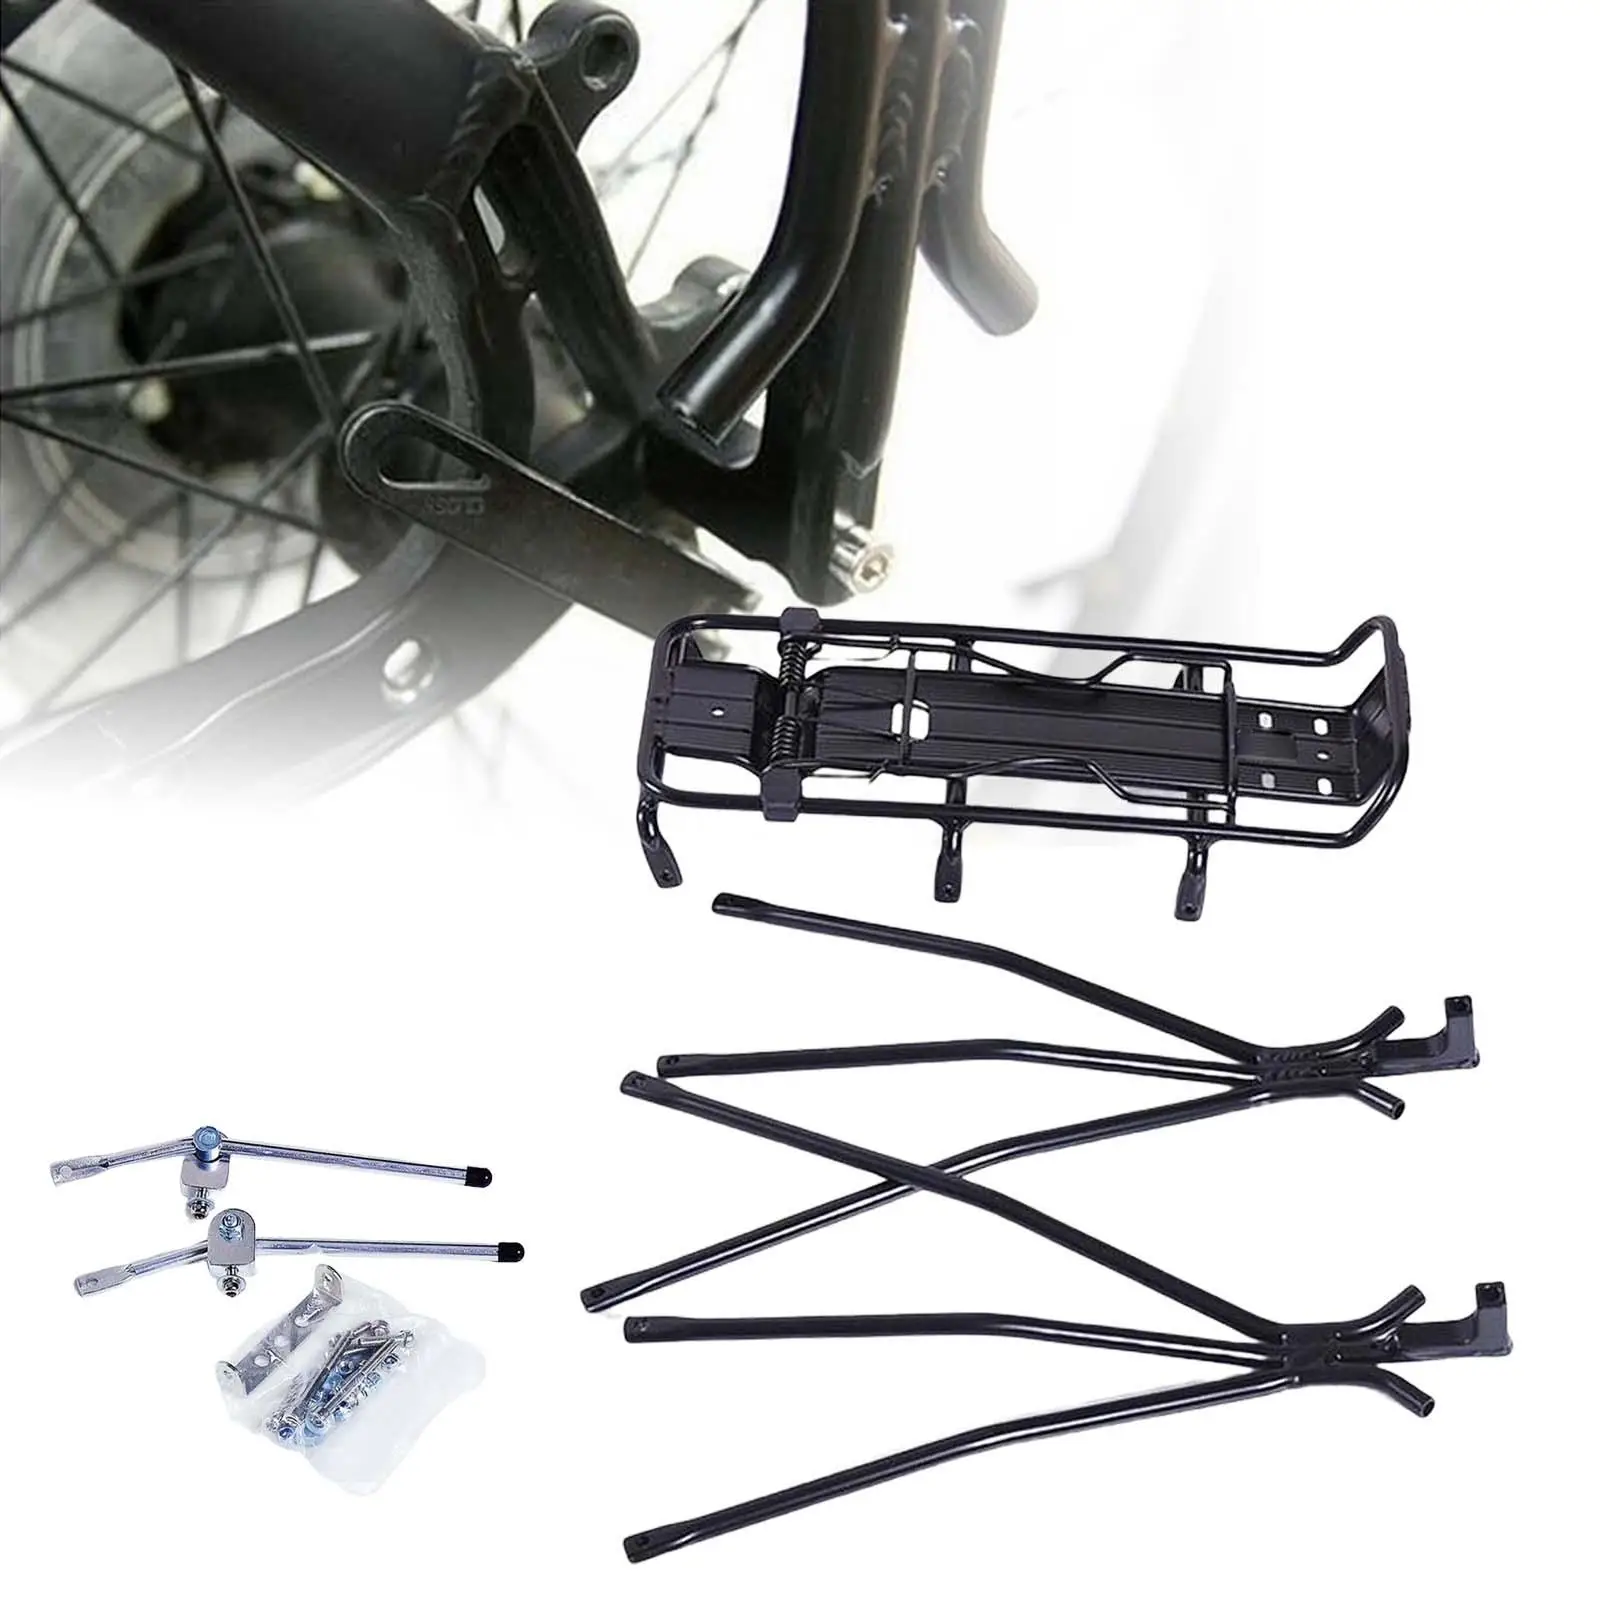 Mountain Road Bike Rear Carrier Rack Bicycle Cargo Pannier Rack Luggage Cycling